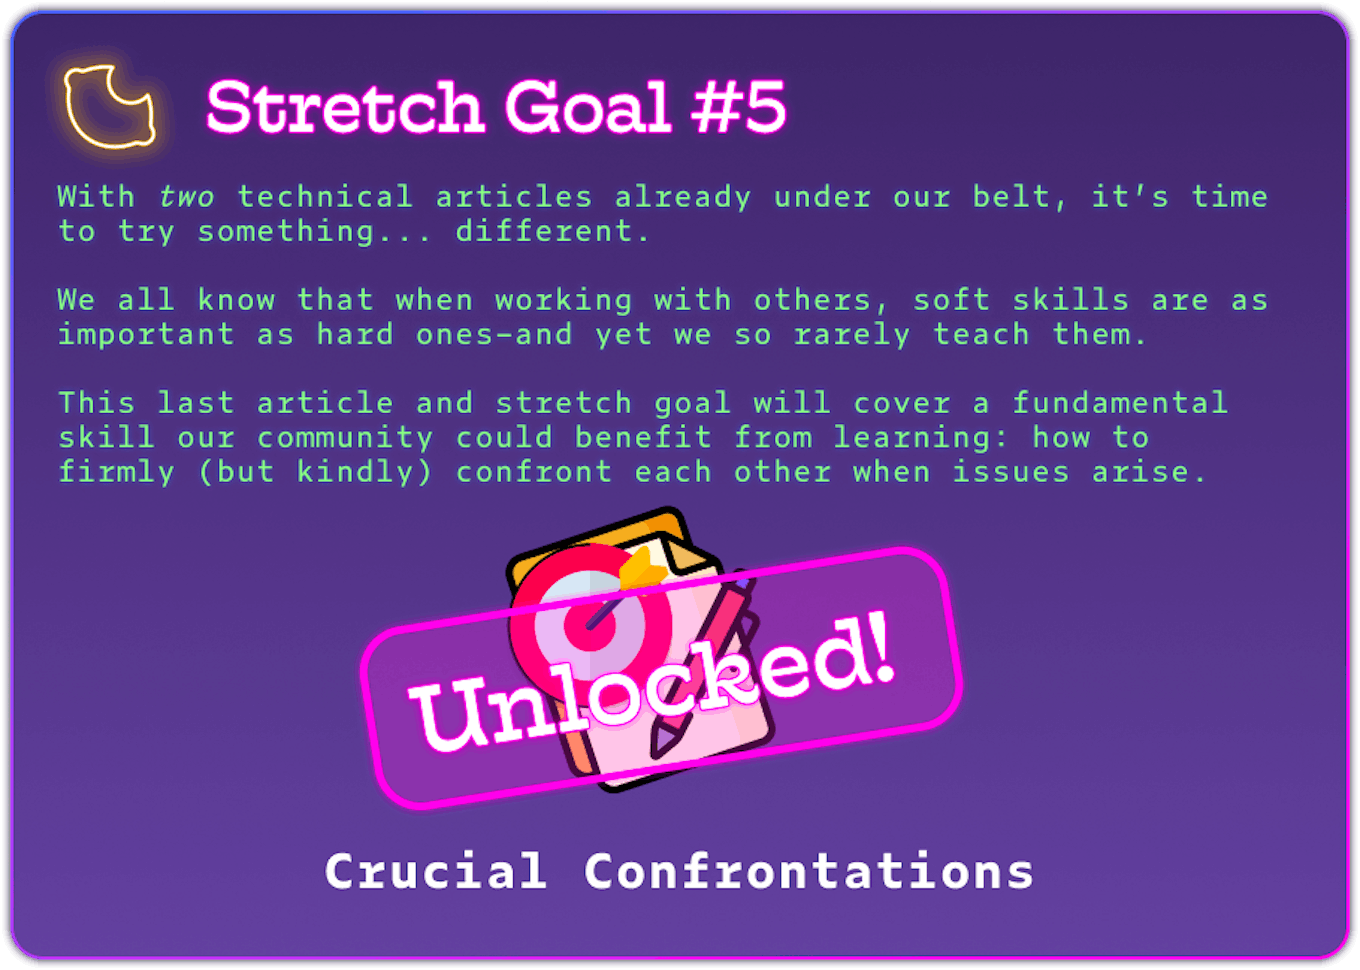 Stretch Goal #5 With two technical articles already under our belt, it’s time to try something... different.  We all know that when working with others, soft skills are as important as hard ones–and yet we so rarely teach them.  This last article and stretch goal will cover a fundamental skill our community could benefit from learning: how to firmly (but kindly) confront each other when issues arise. REACHED. Crucial Confrontations